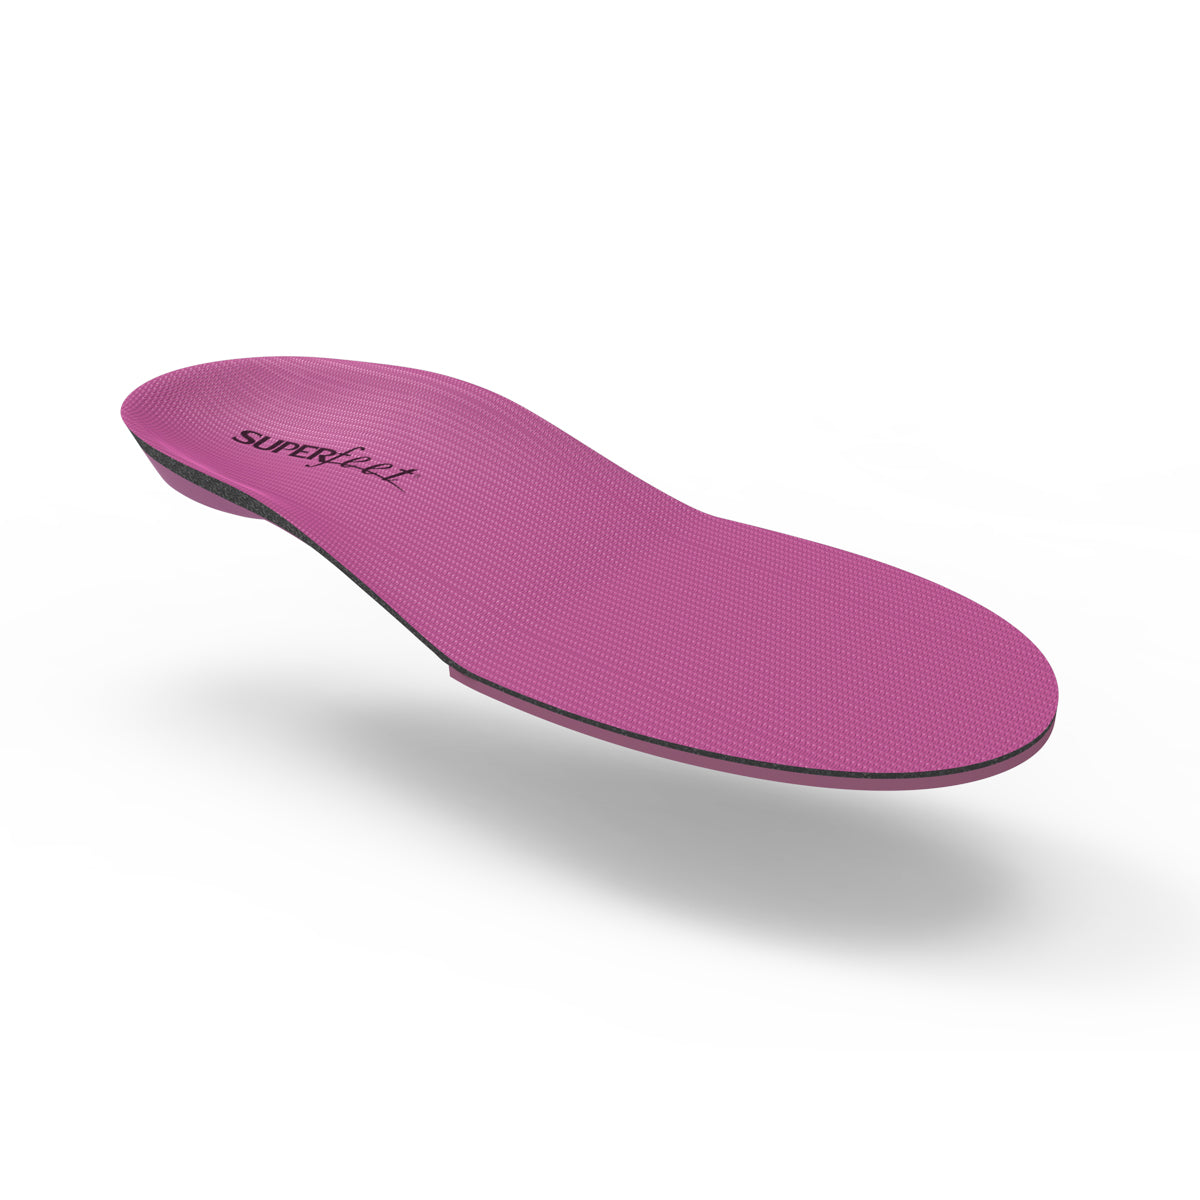 Insoles for Over-Supination | Supination Insoles – Insoles.com